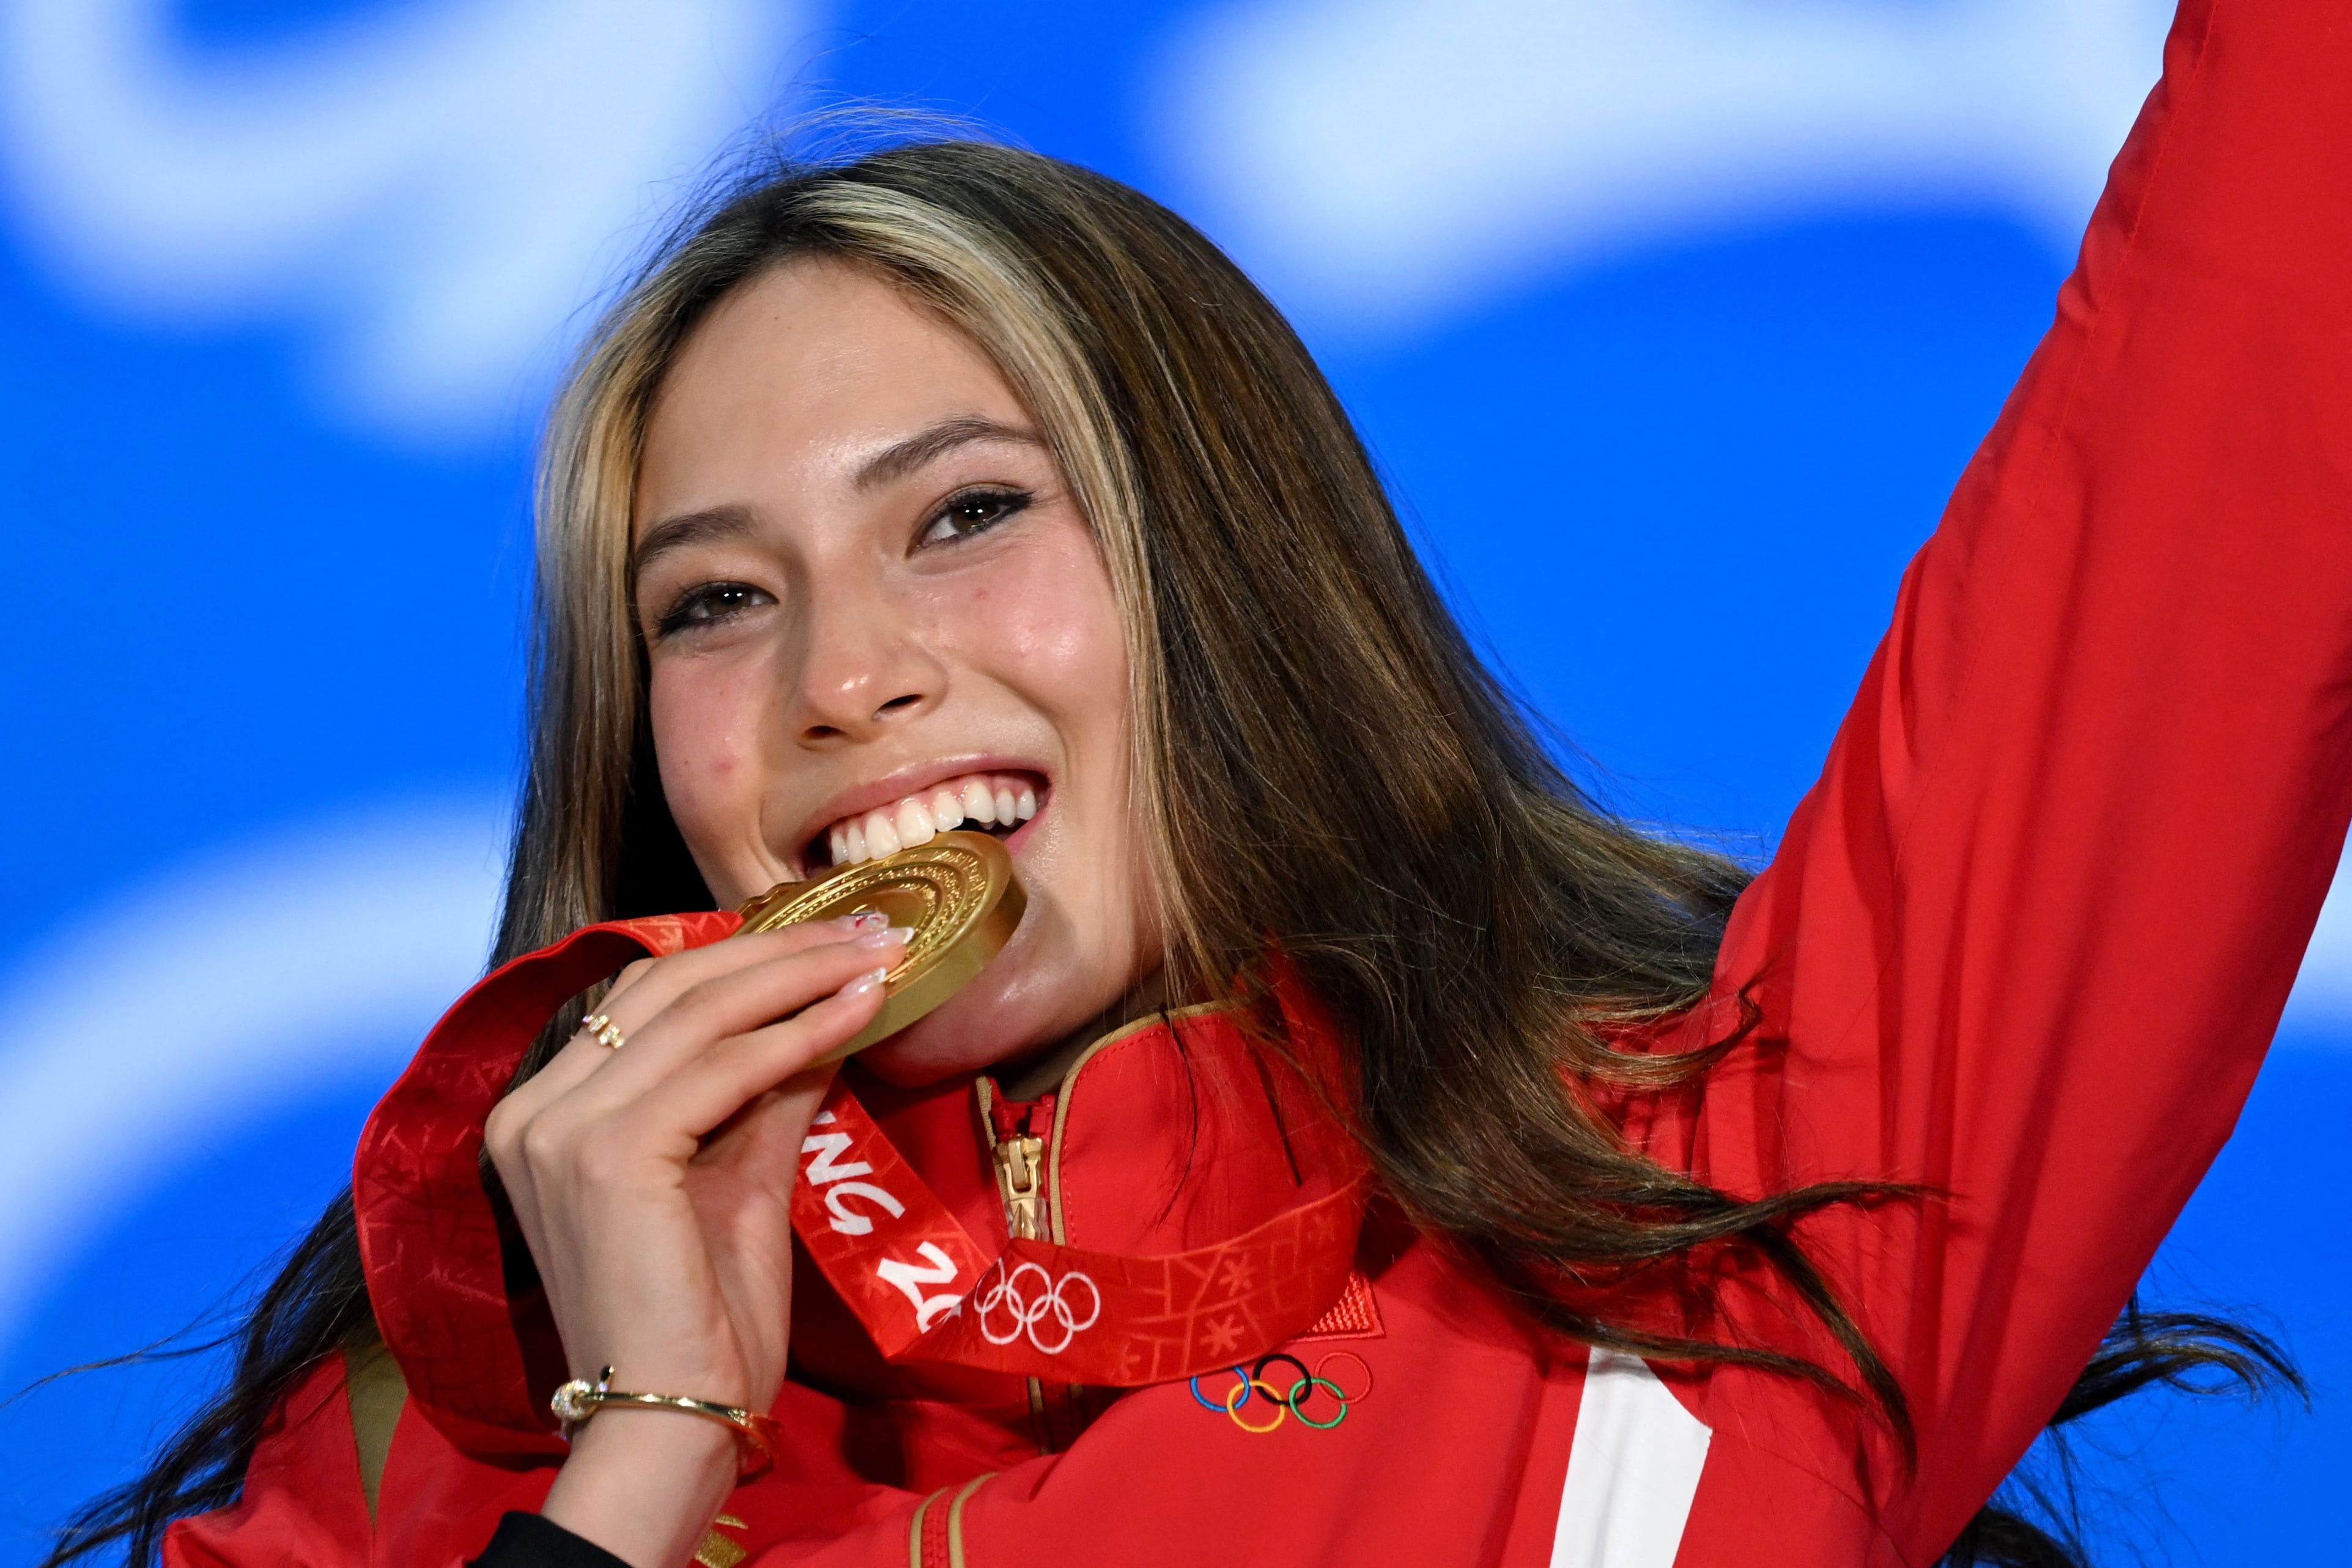 The US-Born freestyle skier, Eileen Gu, who competed for China, has made history